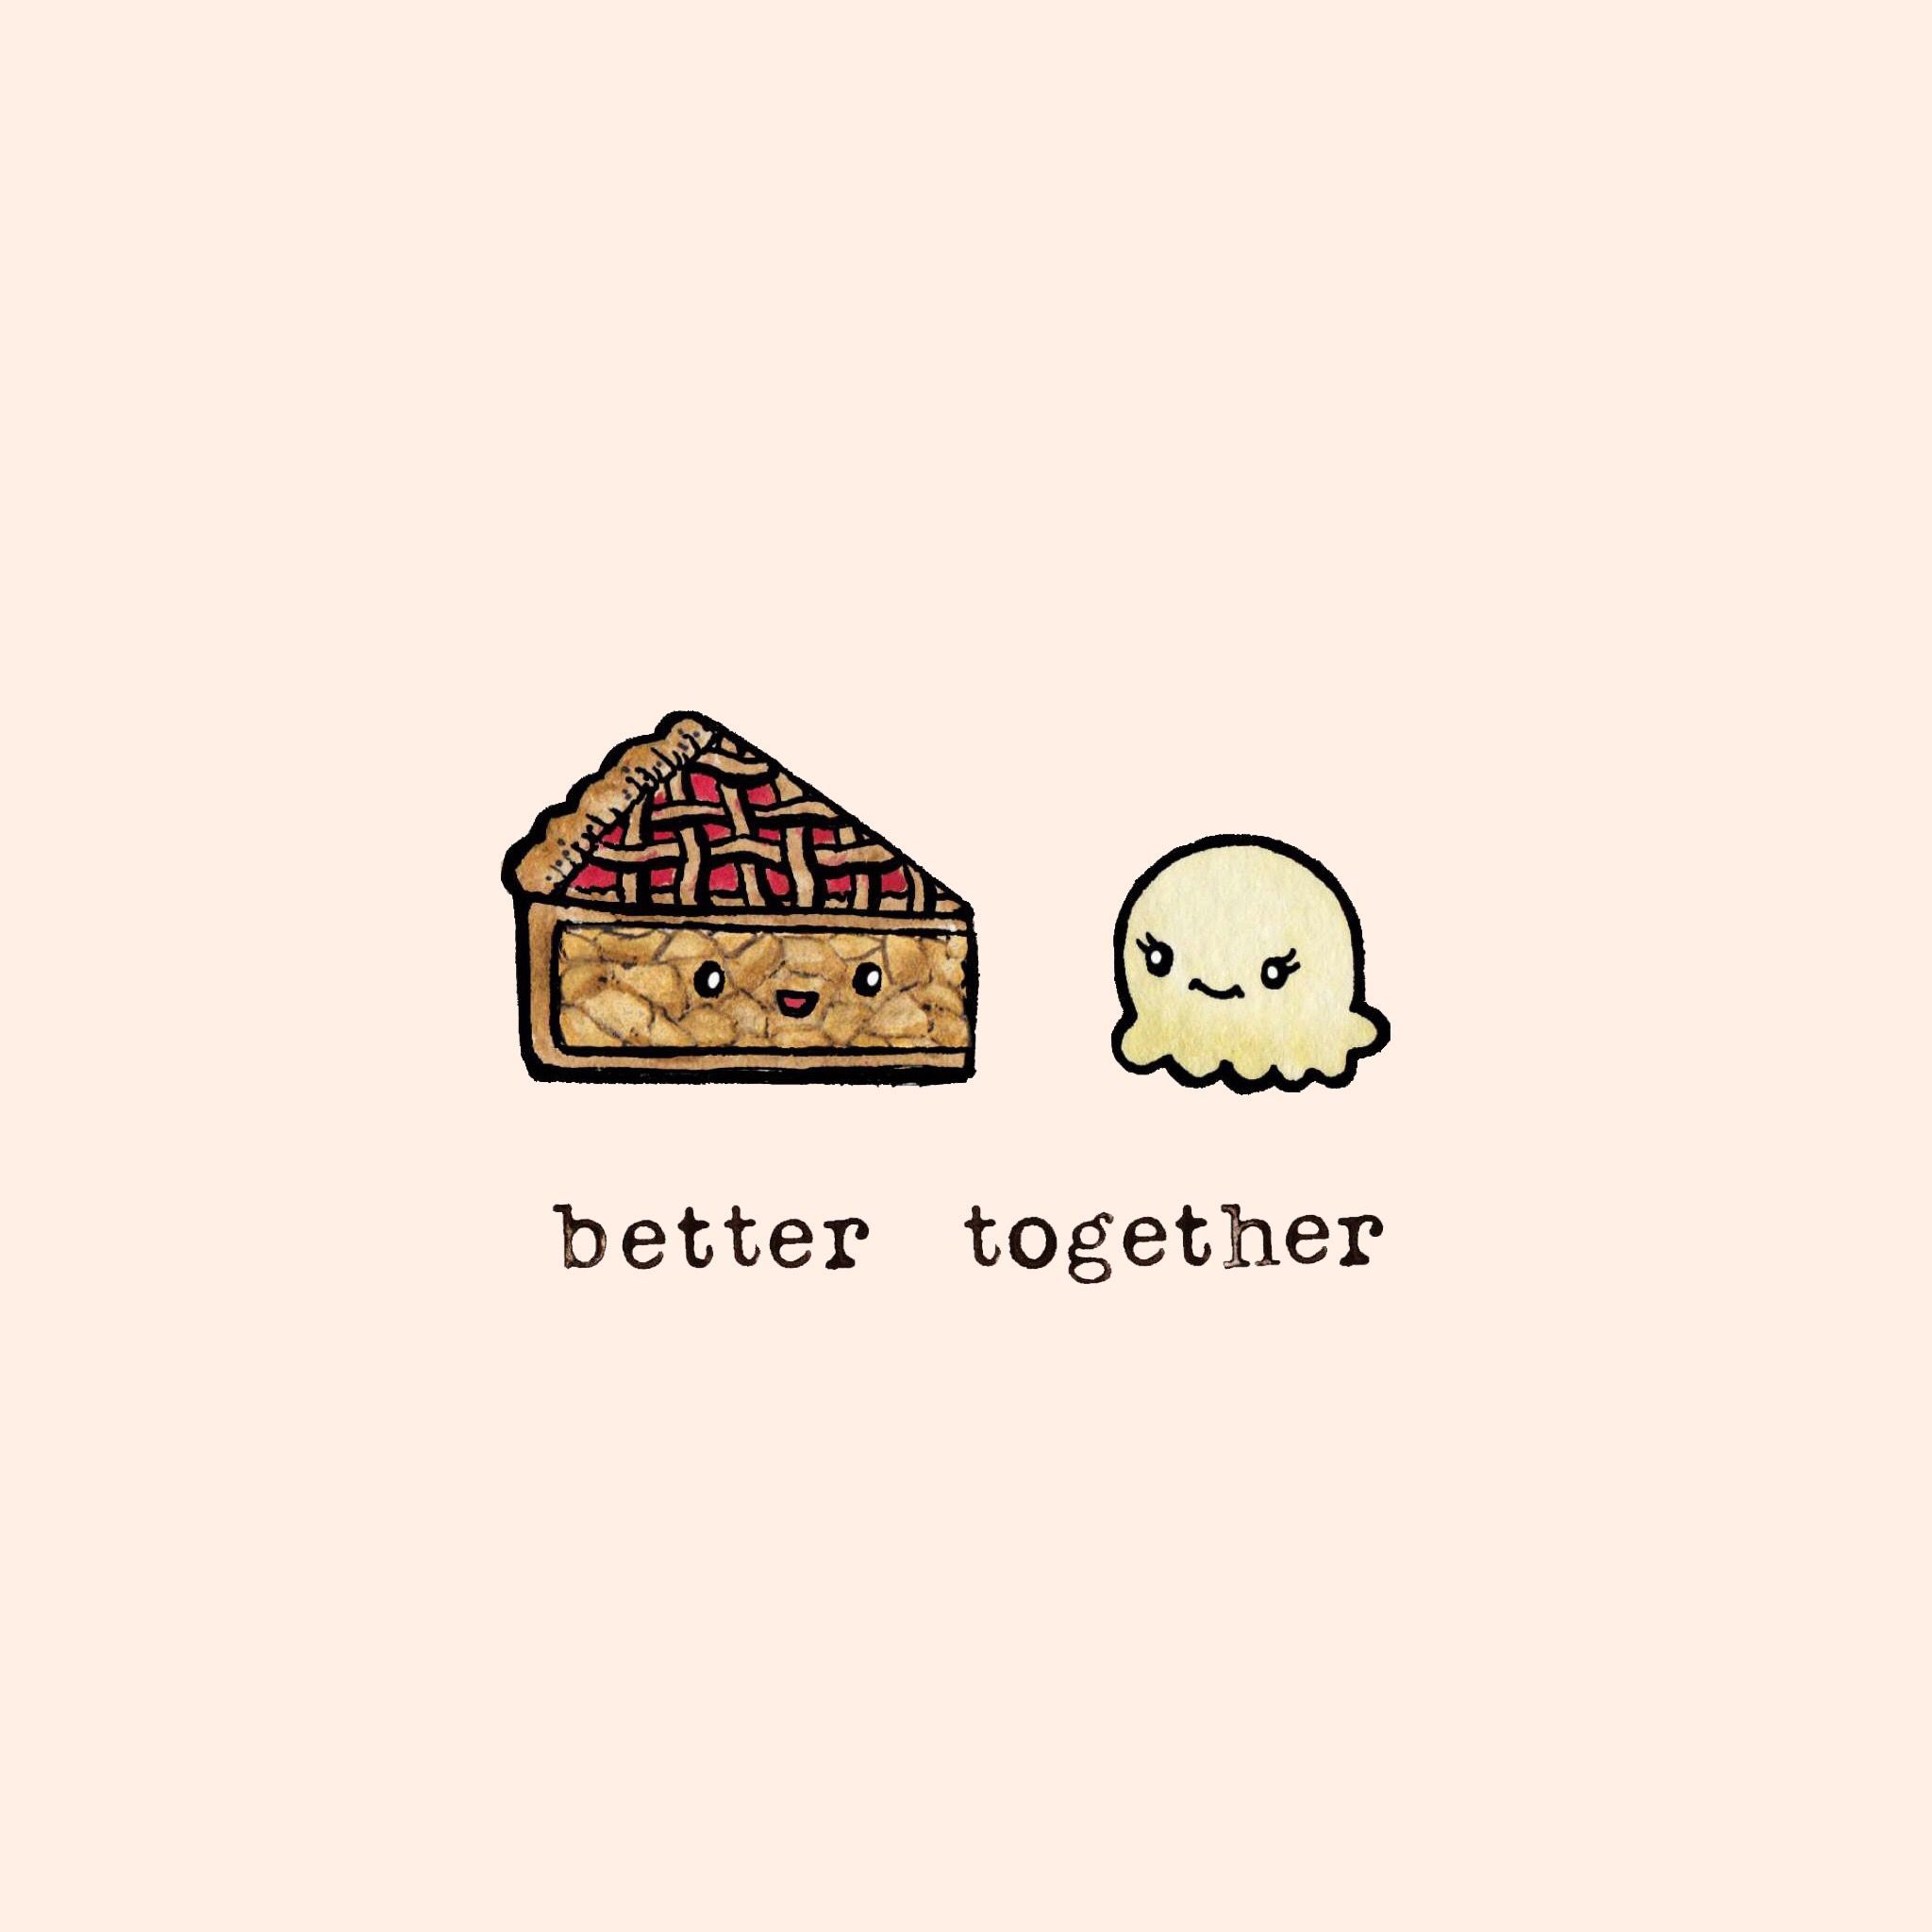 Better together. Better together, Cute background, Kawaii drawings